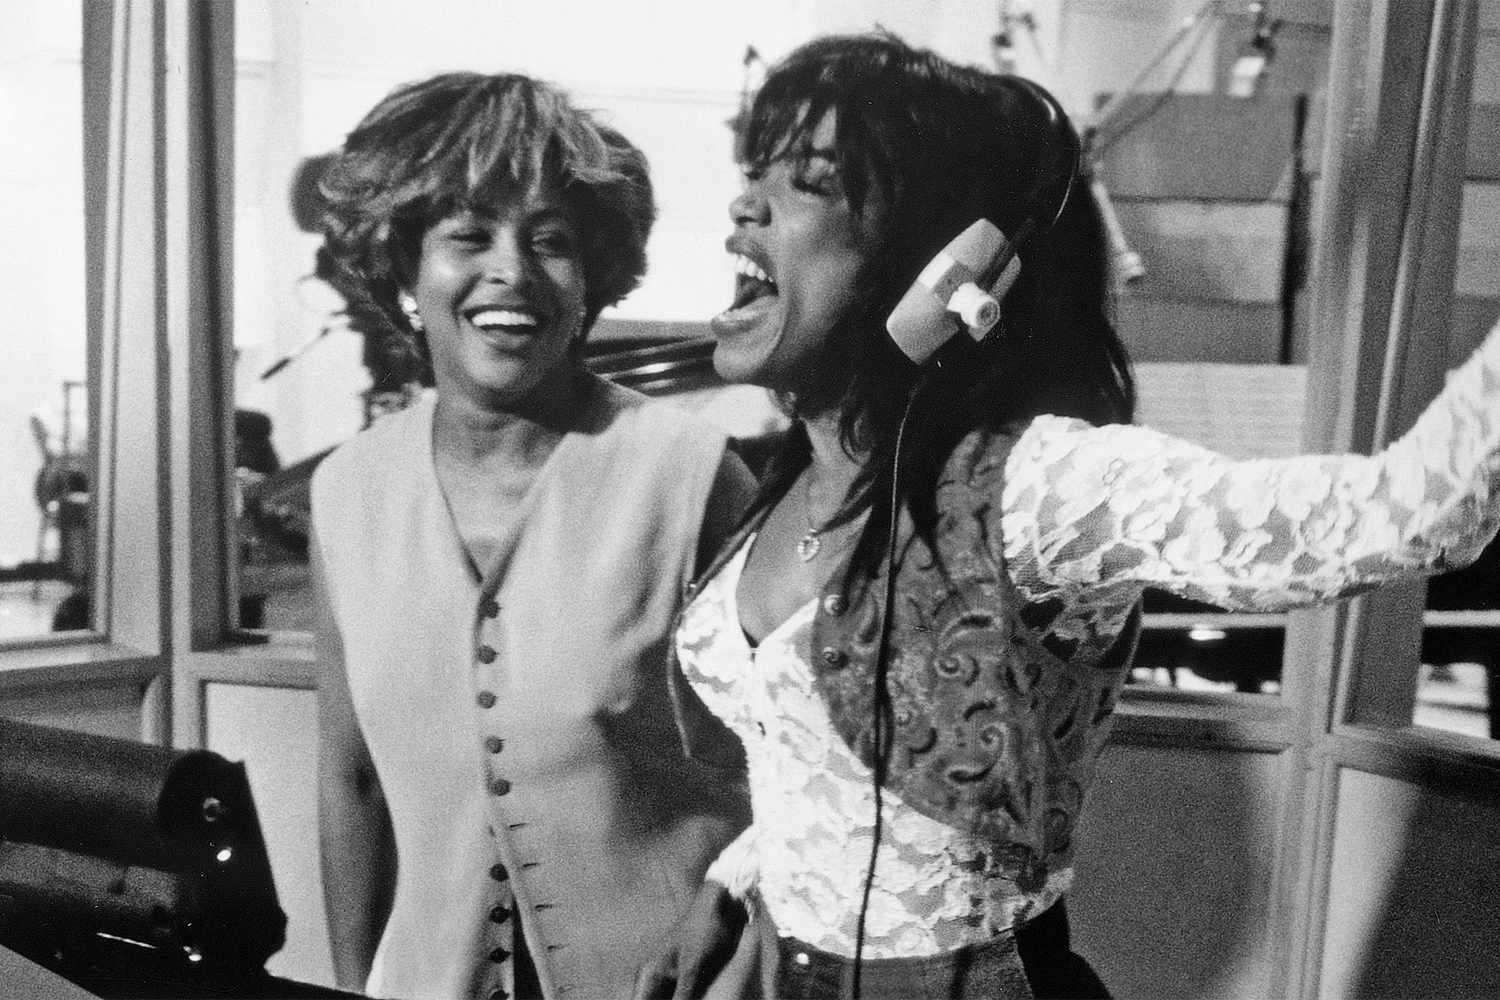 WHAT'S LOVE GOT TO DO WITH IT, from left: Tina Turner, Angela Bassett on the recording studio set, rehearse a song performance, 1993. ph: D Stevens / © Buena Vista Pictures / courtesy Everett Collection